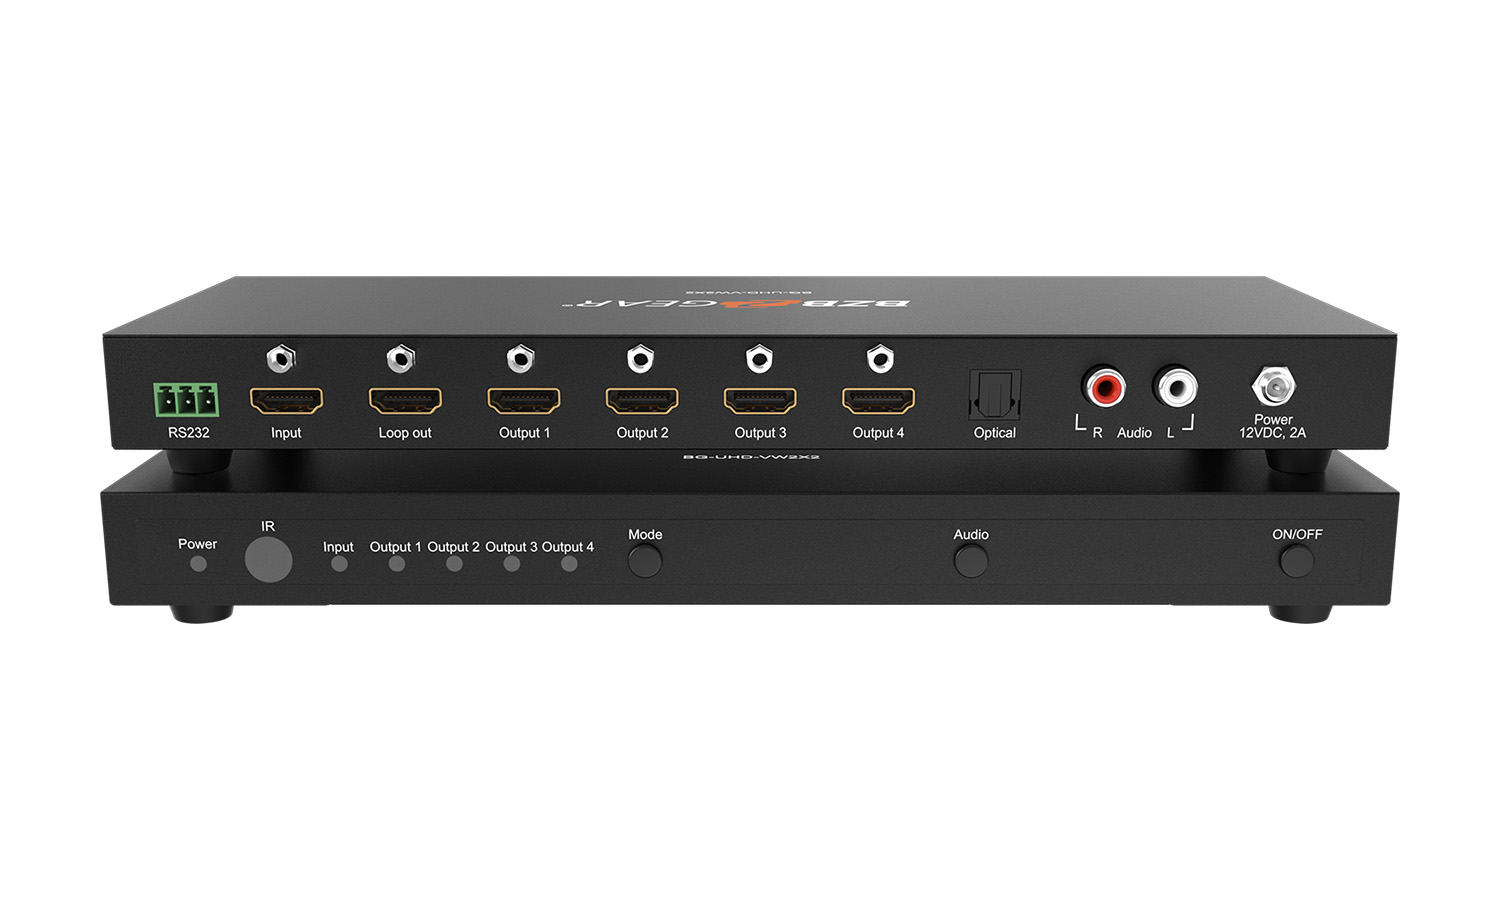 BG-UHD-VW2X2 2X2 4K 18Gbps UHD HDMI Video Wall Processor/Controller with Audio Support by BZBGEAR